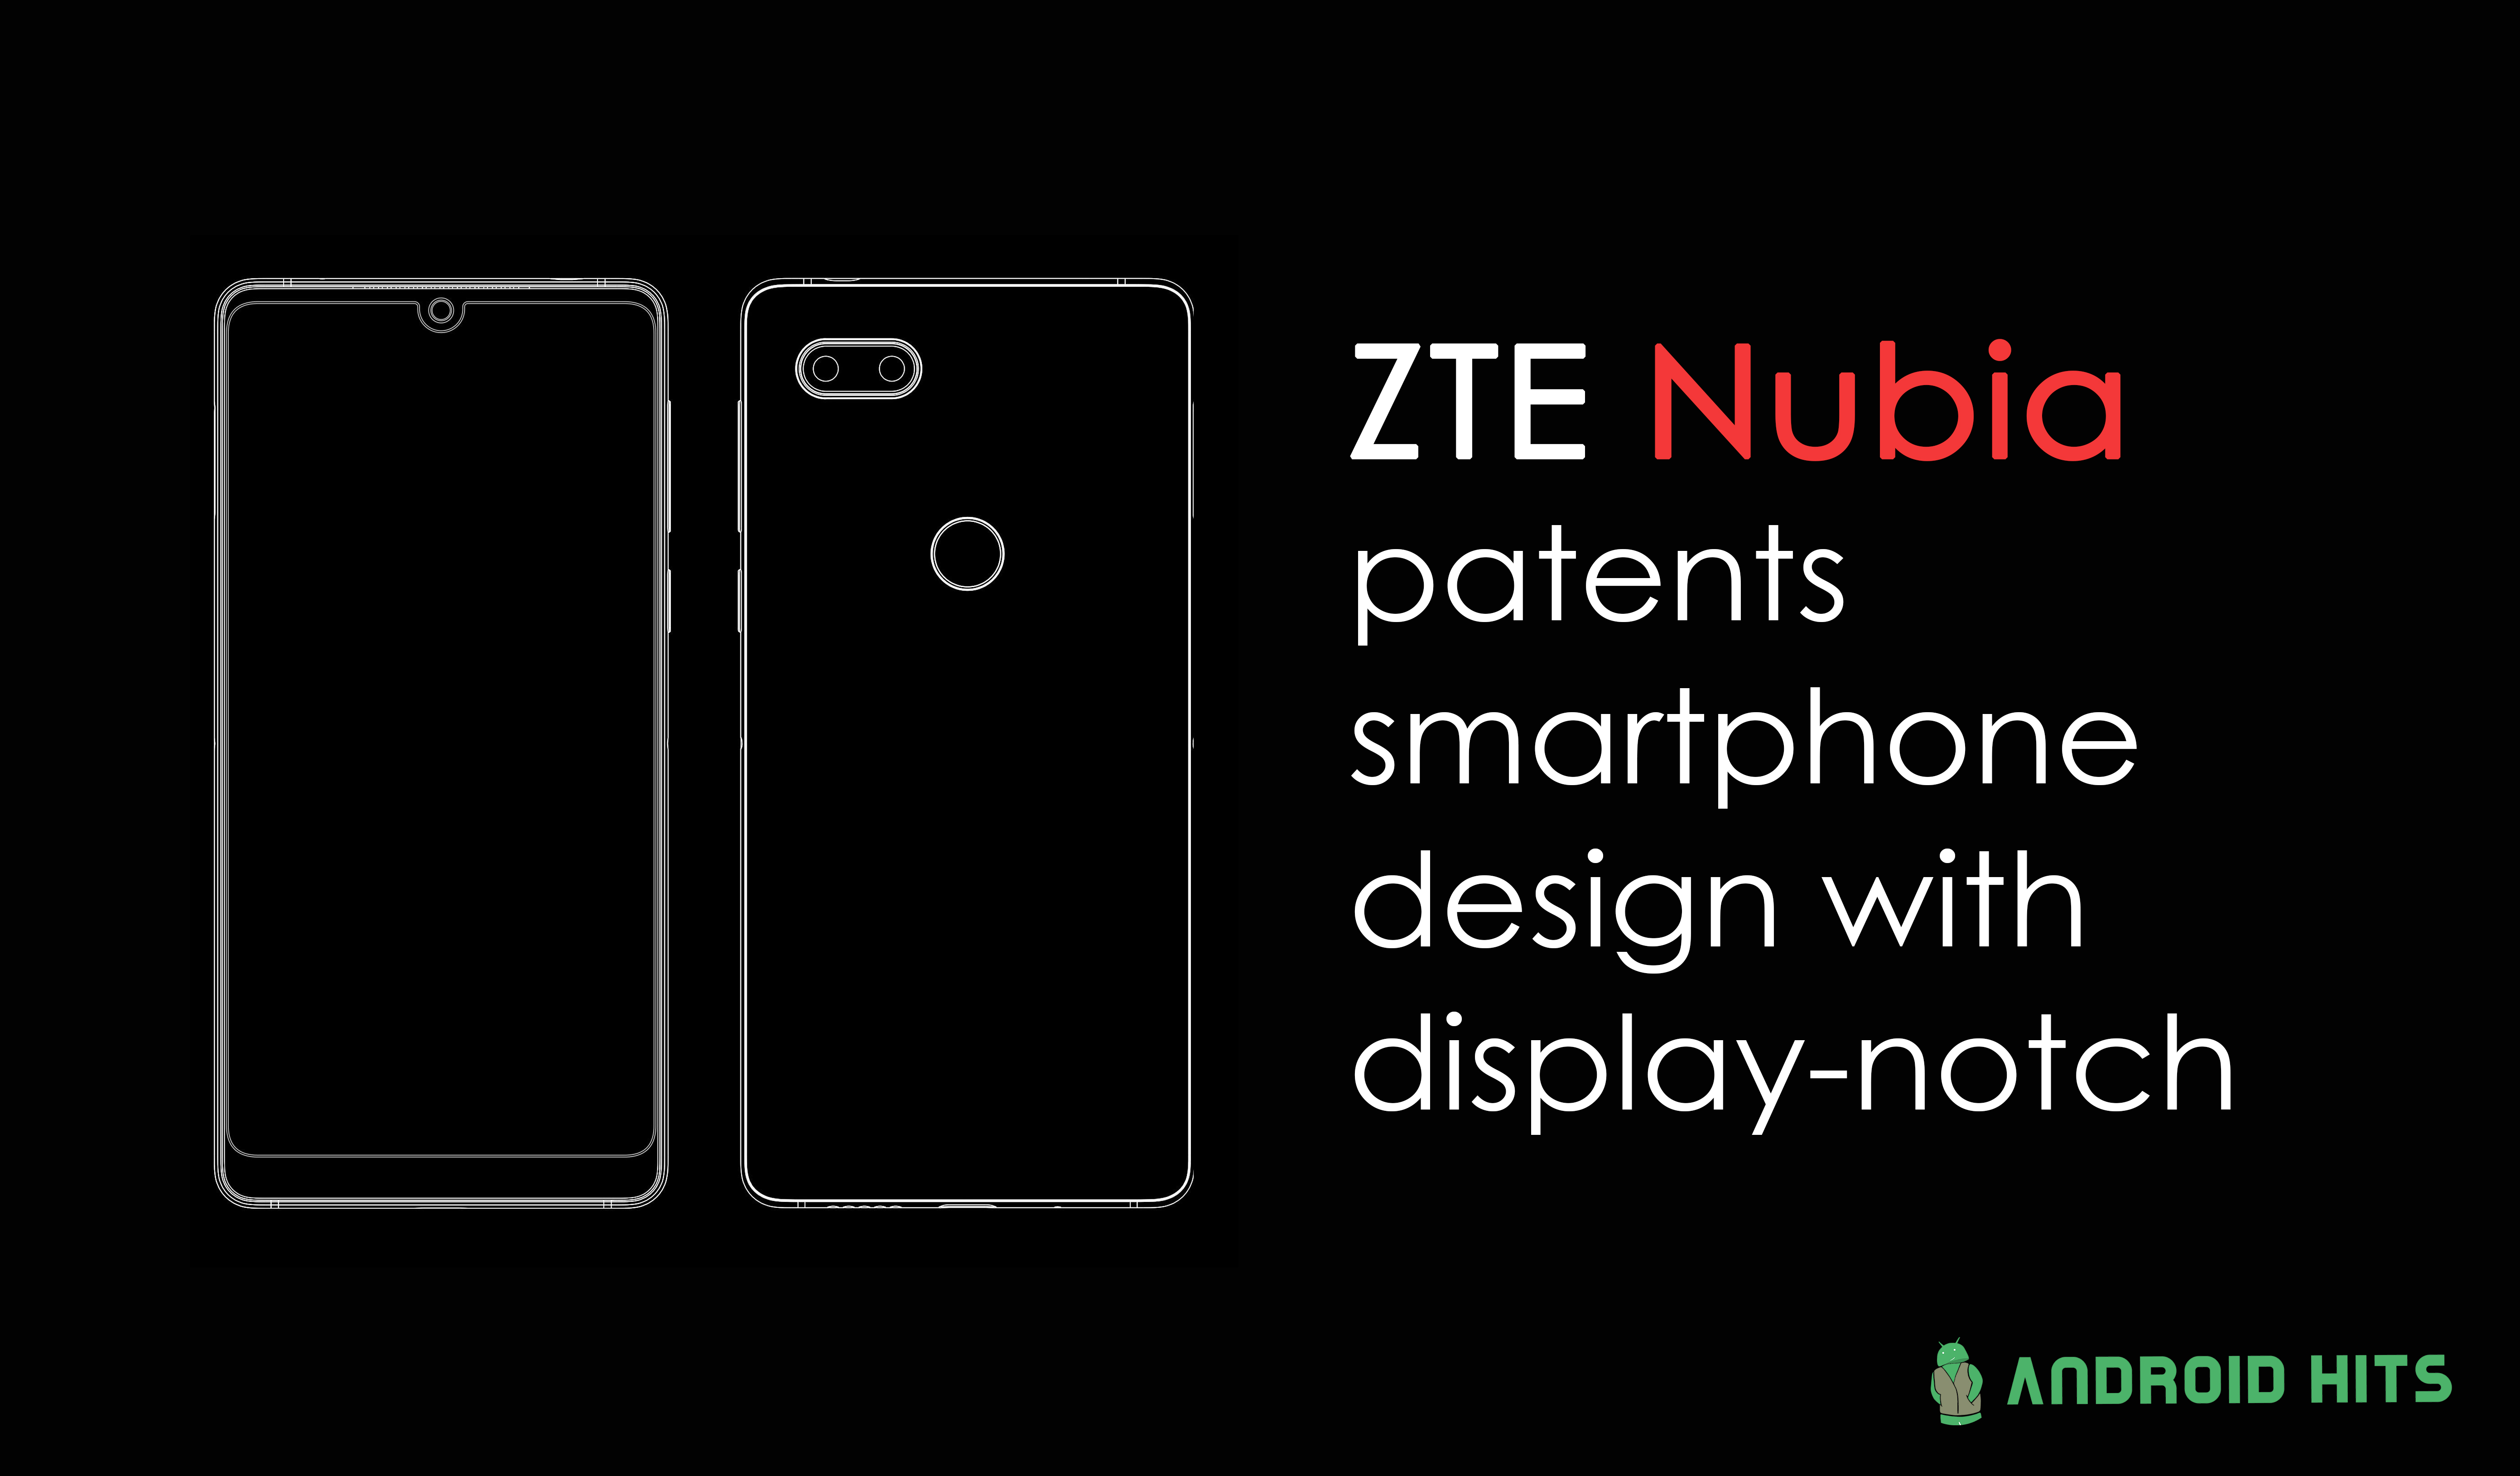 ZTE Nubia patents smartphone design with display-notch; could be Nubia Z19 1